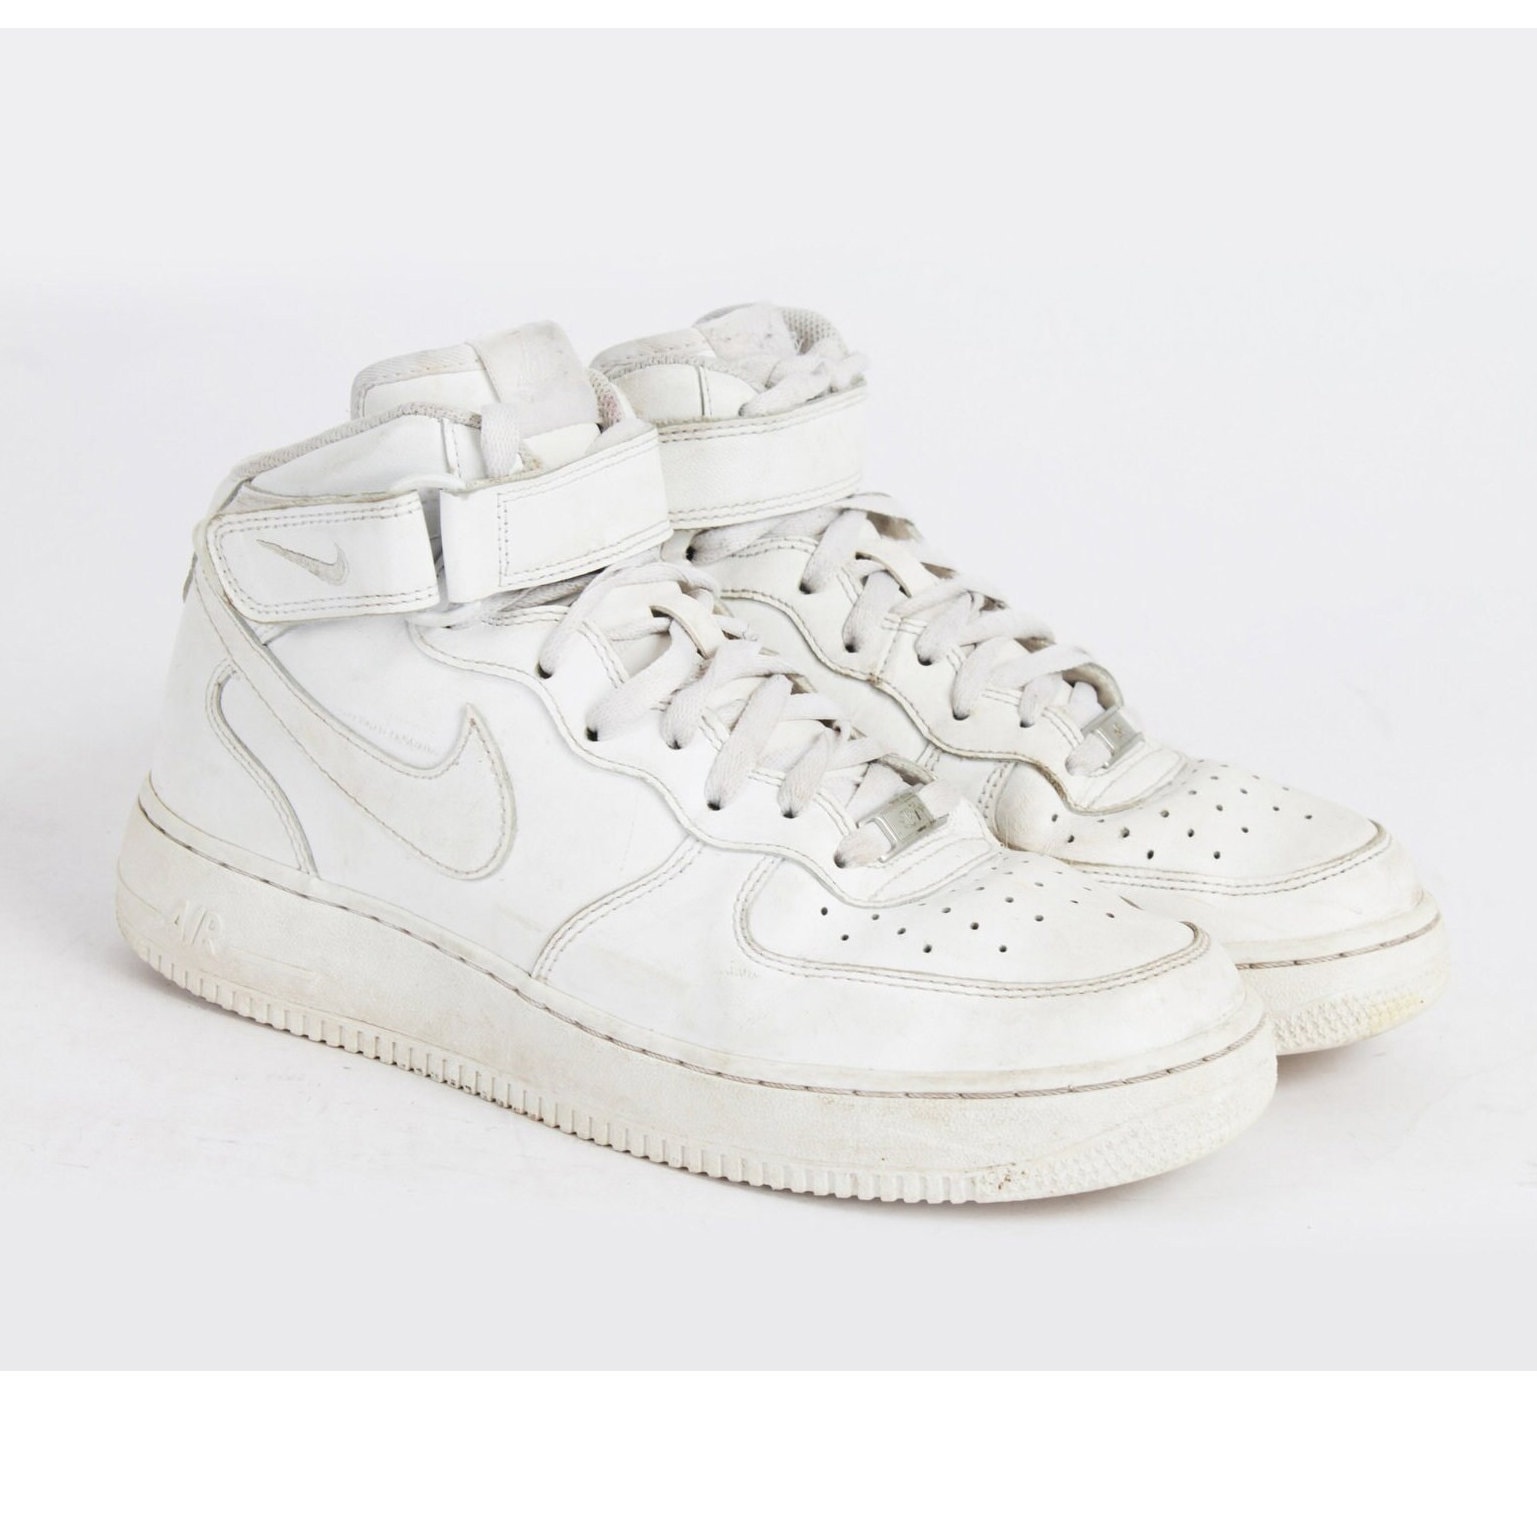 Nike Womens Air Force 1 Trainer - White - Size 5